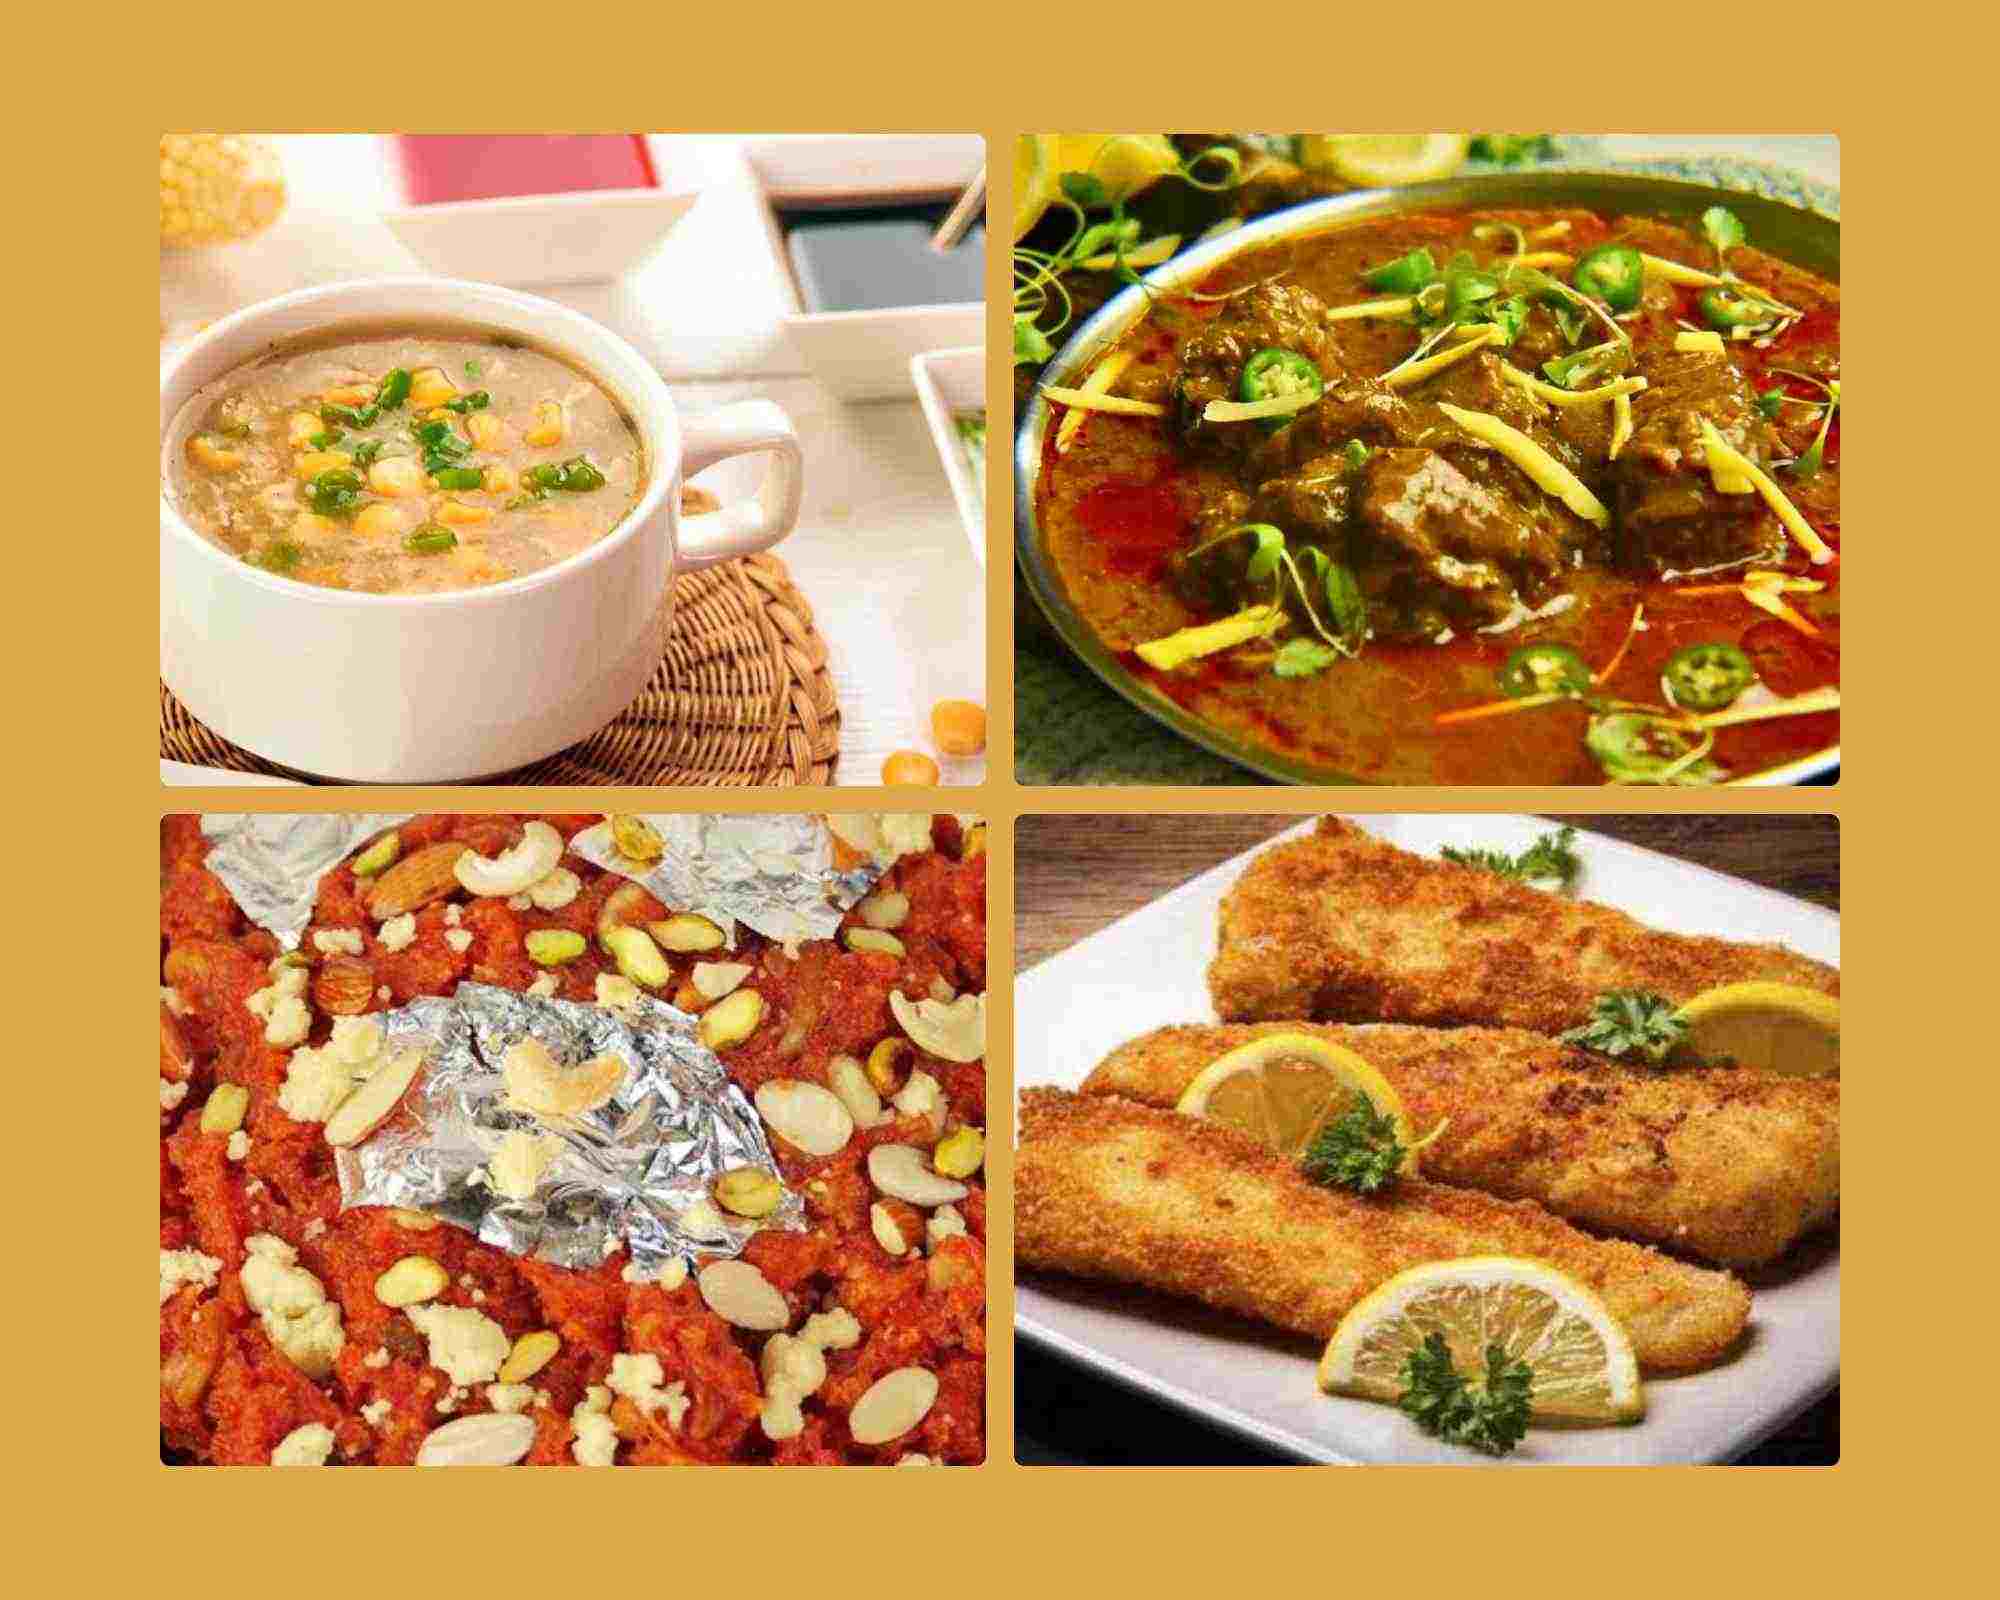 Delicious Winter Foods in Pakistan: A Culinary Guide for the Season